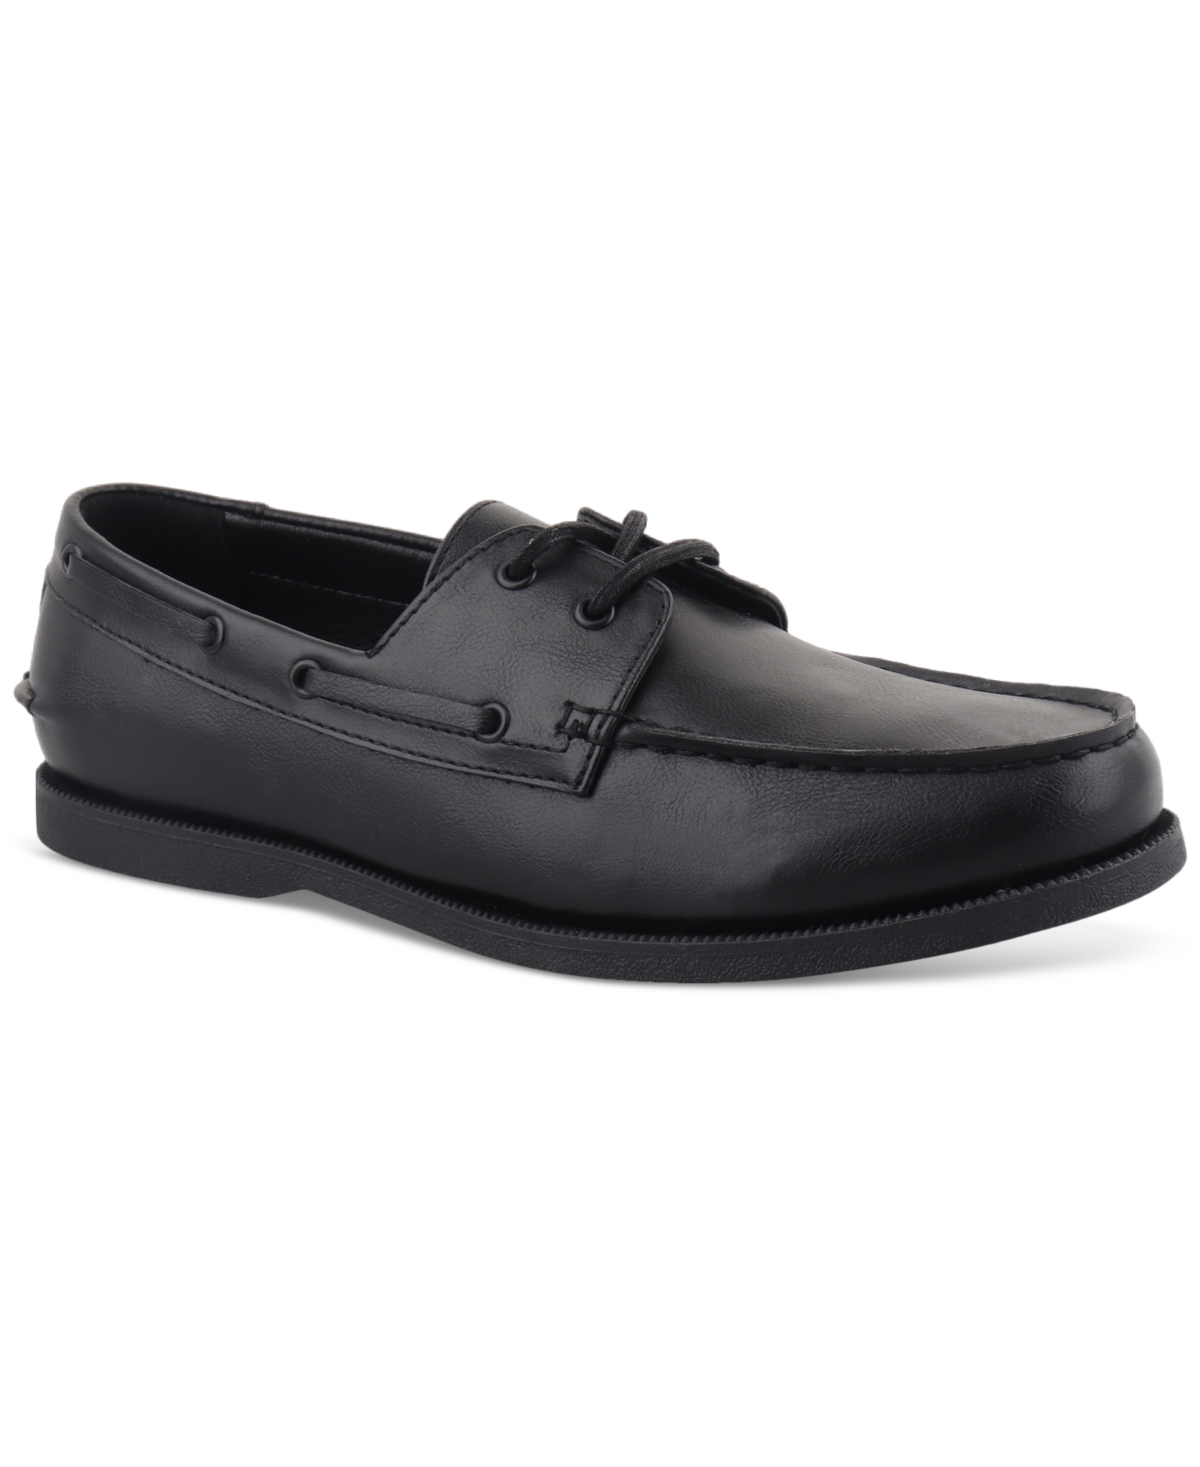 Men's Elliot Boat Shoes, Created for Macy's - Navy